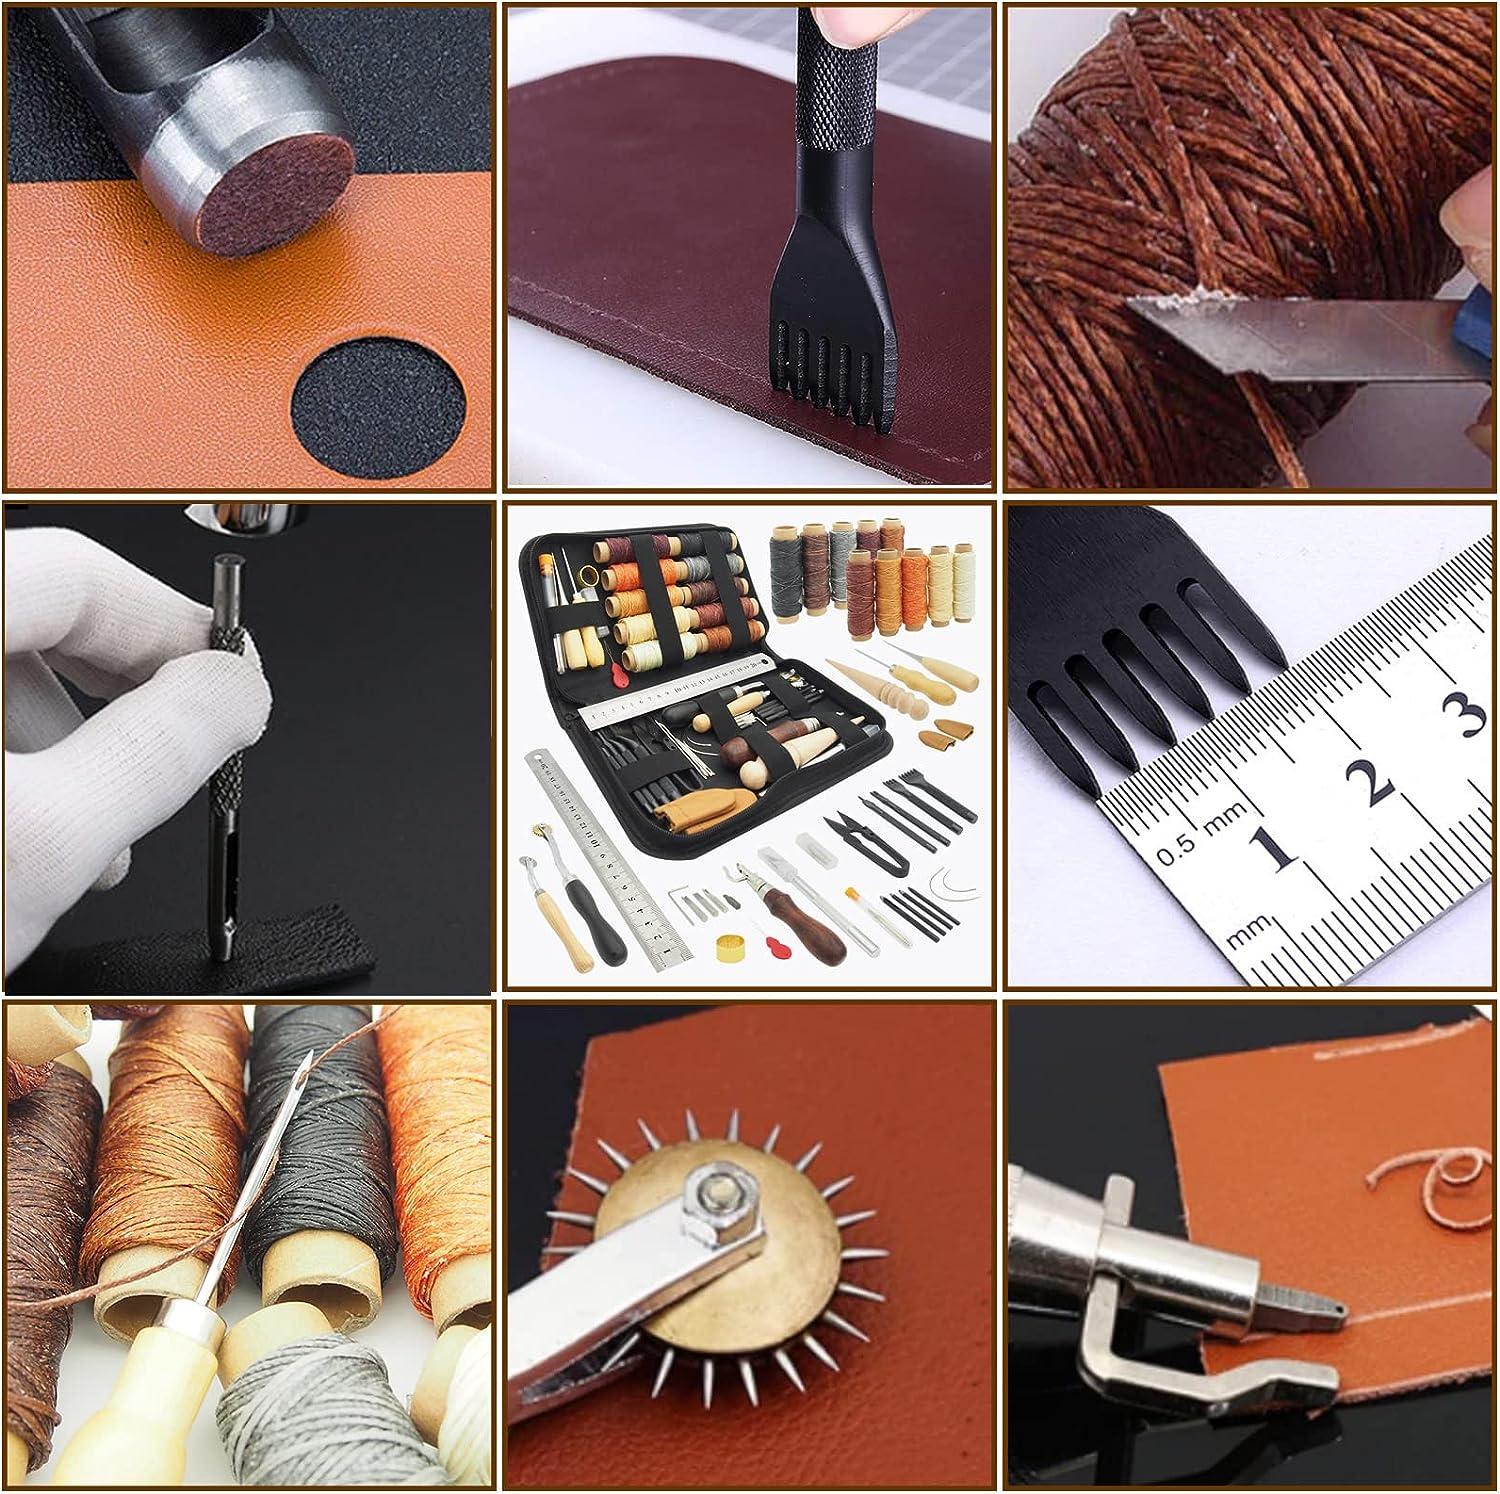 PLANTIONAL Leather Working Tools for Beginners: Professional Leather Craft  Kit with Waxed Thread Groover Awl Stitching Punch for Leathercraft Adults  Gifts